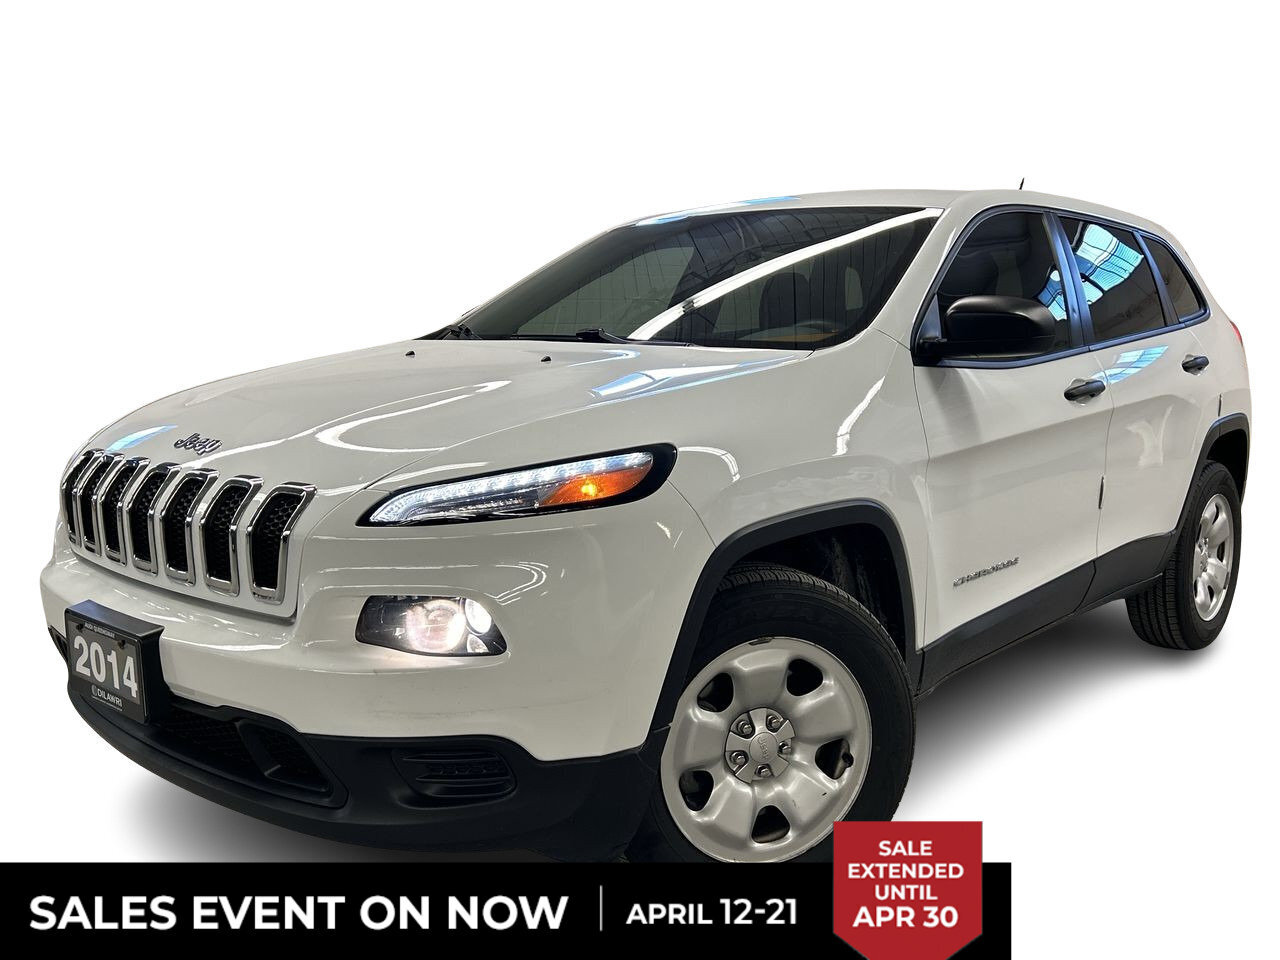 2014 Jeep Cherokee 4x4 Sport | 1st Payment on Us April 12th -30th | A